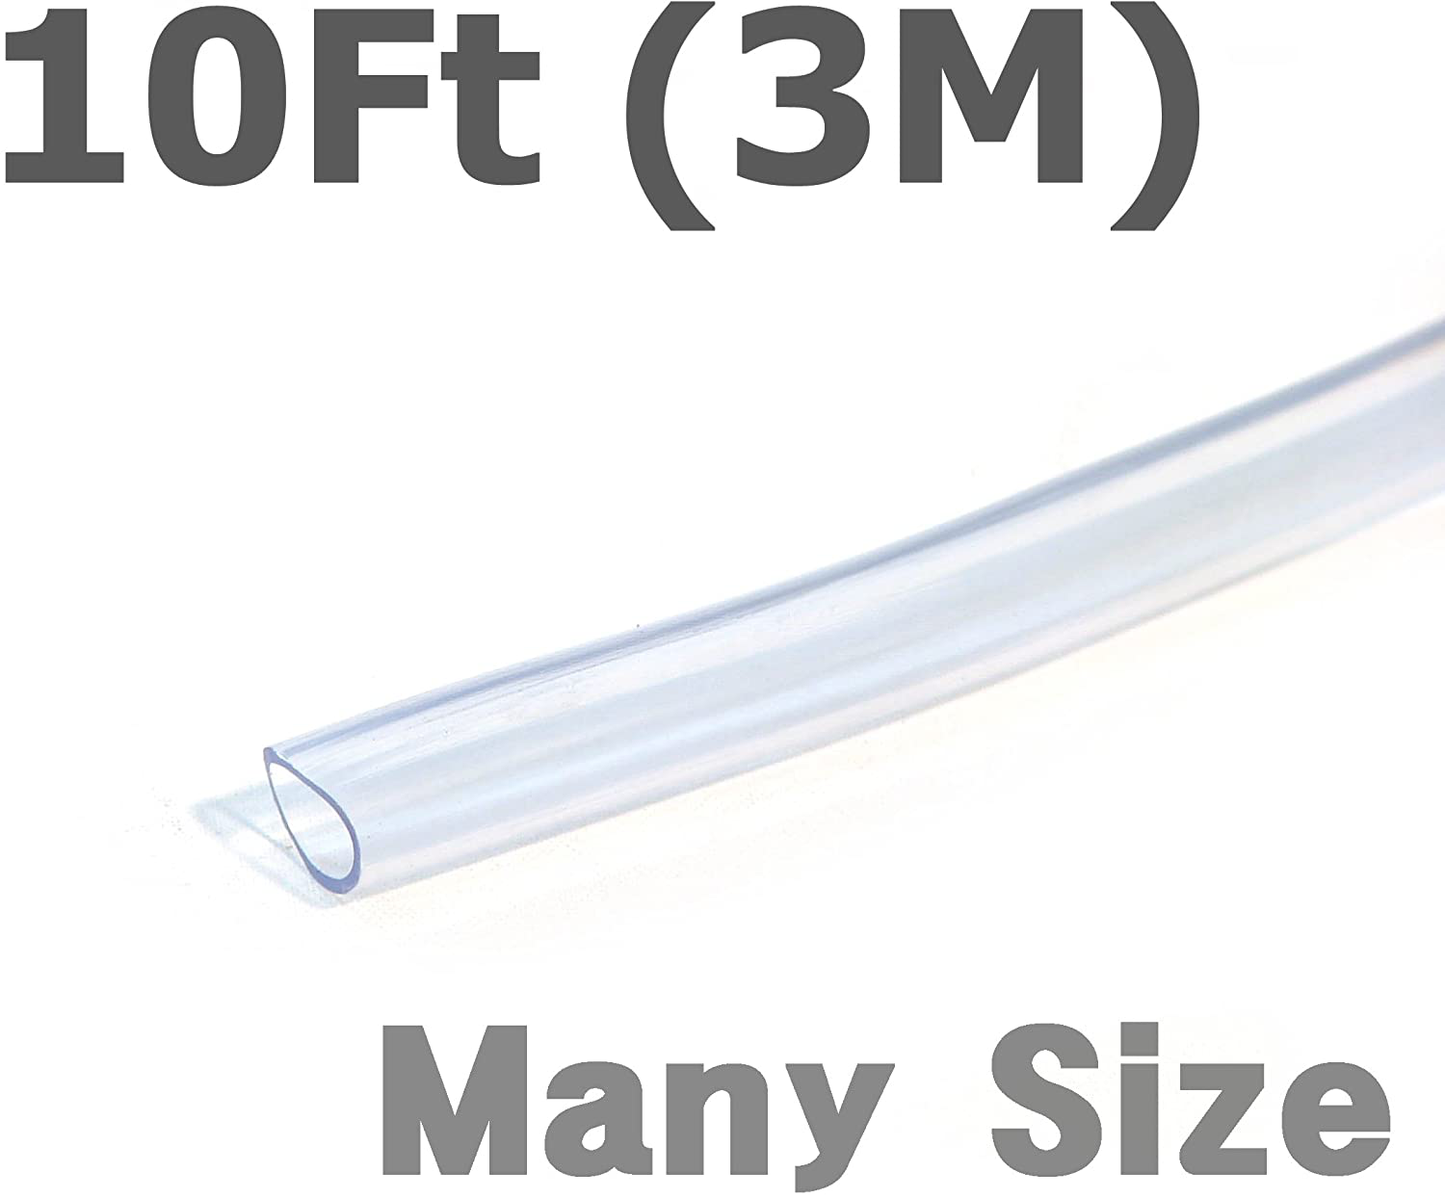 Inner 5/32" Outer 1/4" 10 Ft 3 Metre PVC Clear Tubing Flexible Air Food Water Delivery Feeding Hose Garden Pond Aquarium